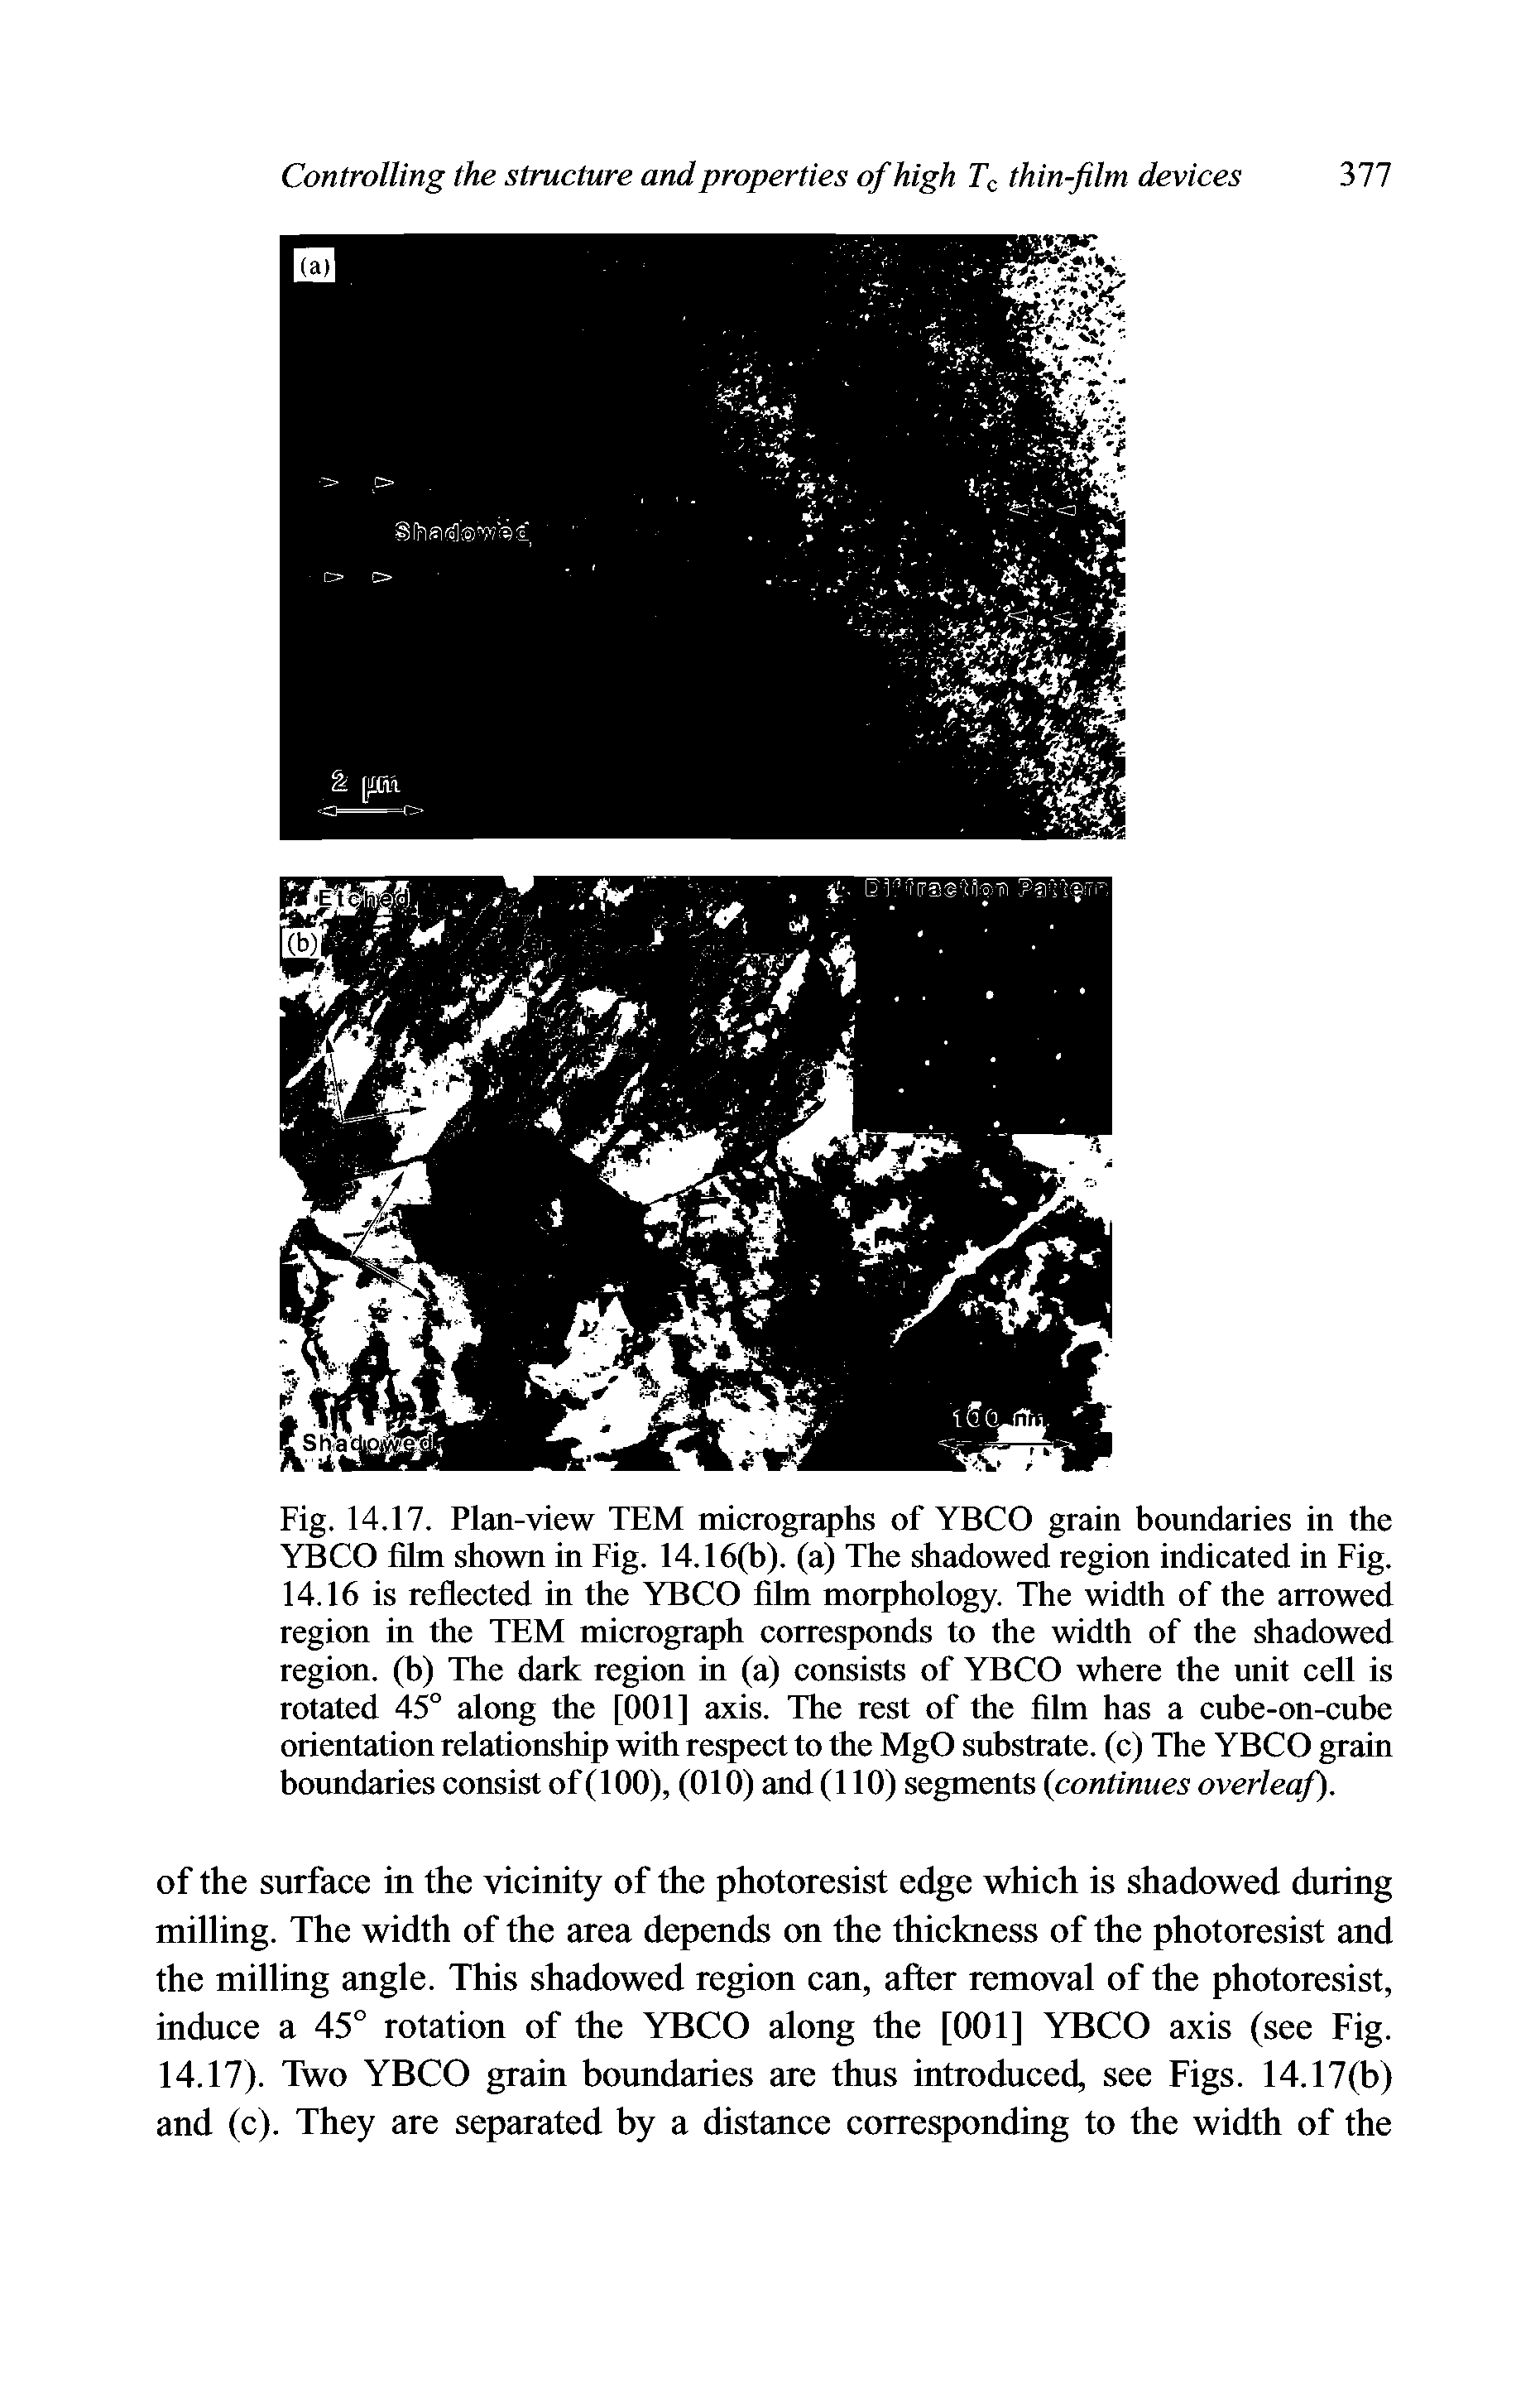 Fig. 14.17. Plan-view TEM micrographs of YBCO grain boundaries in the YBCO film shown in Fig. 14.16(b). (a) The shadowed region indicated in Fig. 14.16 is reflected in the YBCO film morphology. The width of the arrowed region in the TEM micrograph corresponds to the width of the shadowed region, (b) The dark region in (a) consists of YBCO where the unit cell is rotated 45° along the [001] axis. The rest of the film has a cube-on-cube orientation relationship with respect to the MgO substrate, (c) The YBCO grain boundaries consist of (100), (010) and (110) segments continues overleaf).